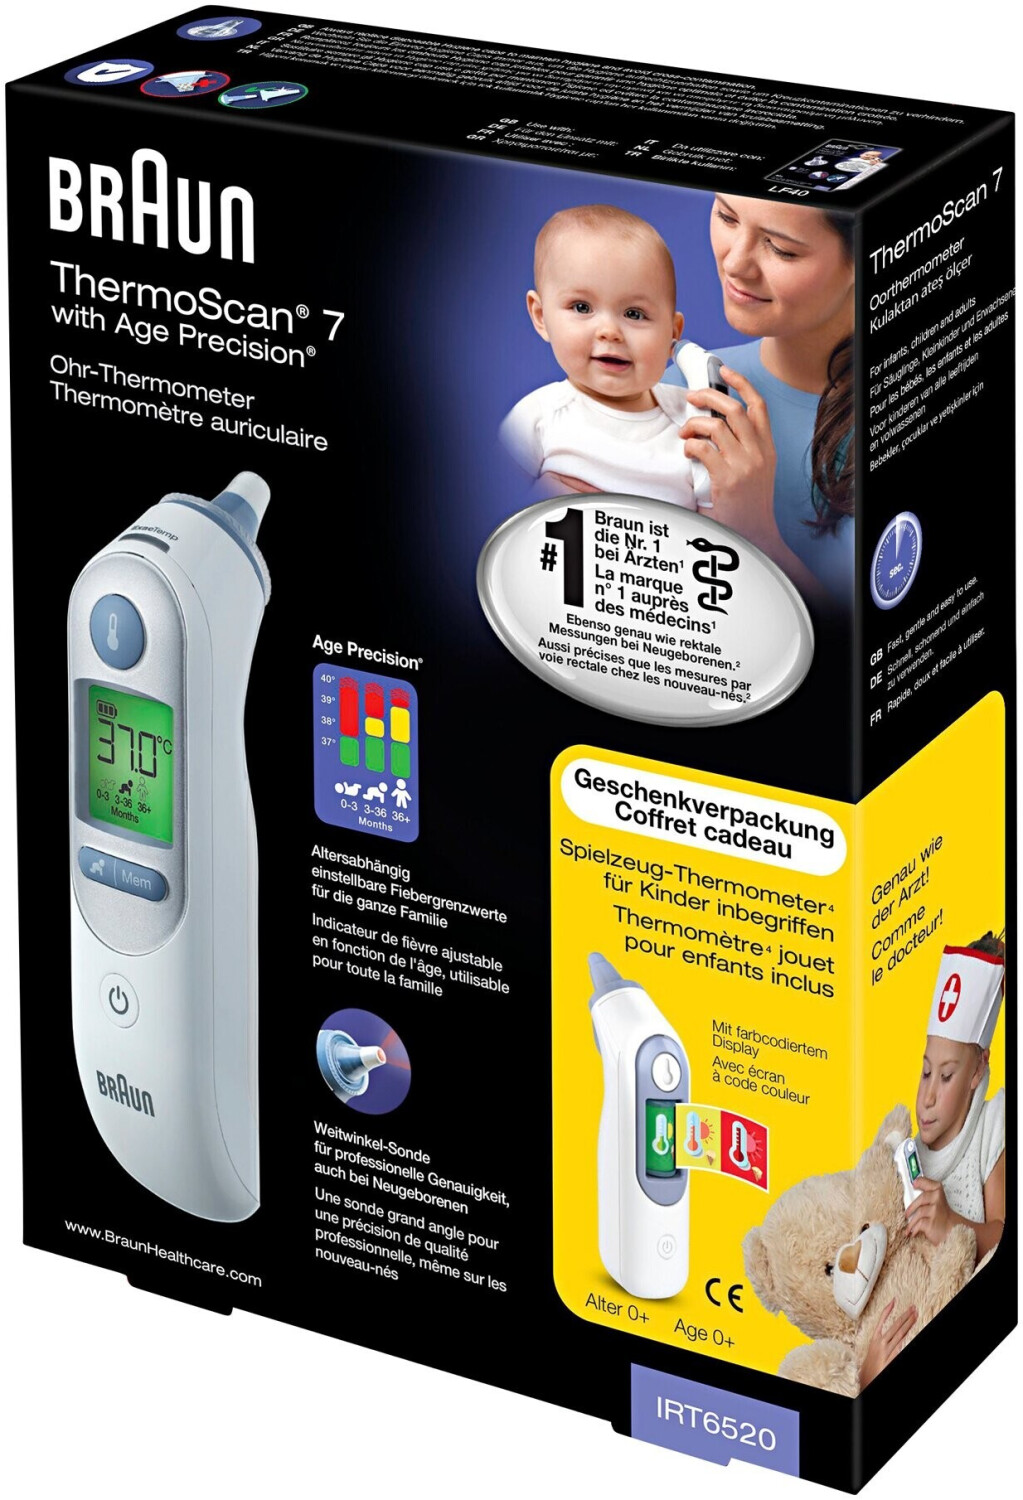 Braun Thermoscan 7+ Infrarot-Ohrthermometer 1 St